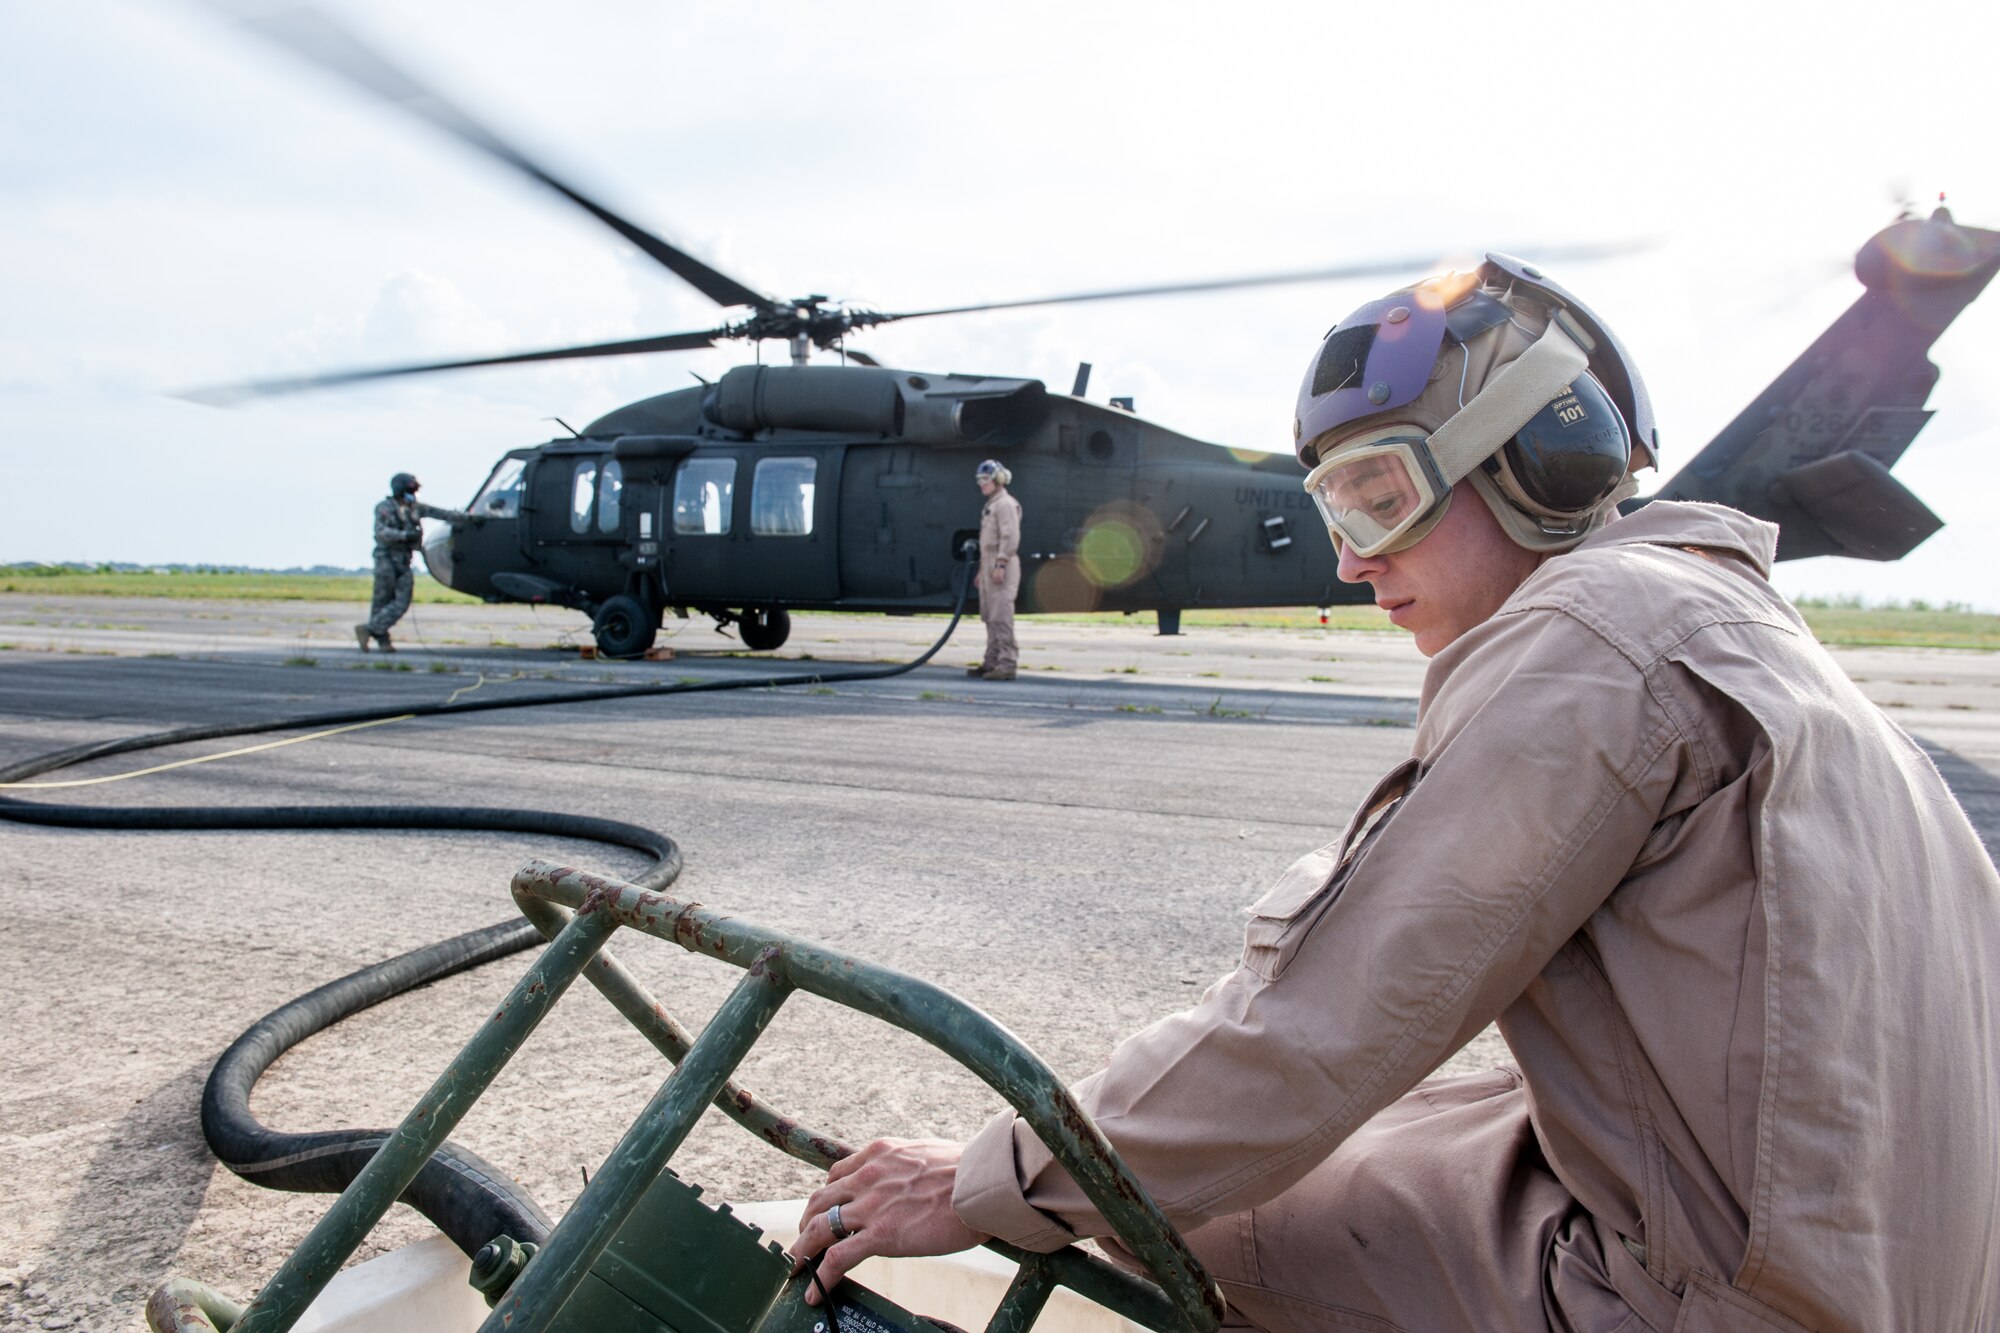 U.S. Marine Cpl. Michael T. Ransom, assigned to the 273rd Marine Wing Support Squadron, Air Operations Company, monitors the amount of fuel transferred to the UH-60 Blackhawk during forward air refueling point operations at McEntire Joint National Guard Base, S.C. on May 14, 2014. Elements of the South Carolina Air and Army National Guard and the U.S. Marines conduct joint operations which are crucial to the ongoing success of operational readiness and deployments around the world.  (U.S. Air National Guard photo by Tech Sgt. Jorge Intriago/Released)